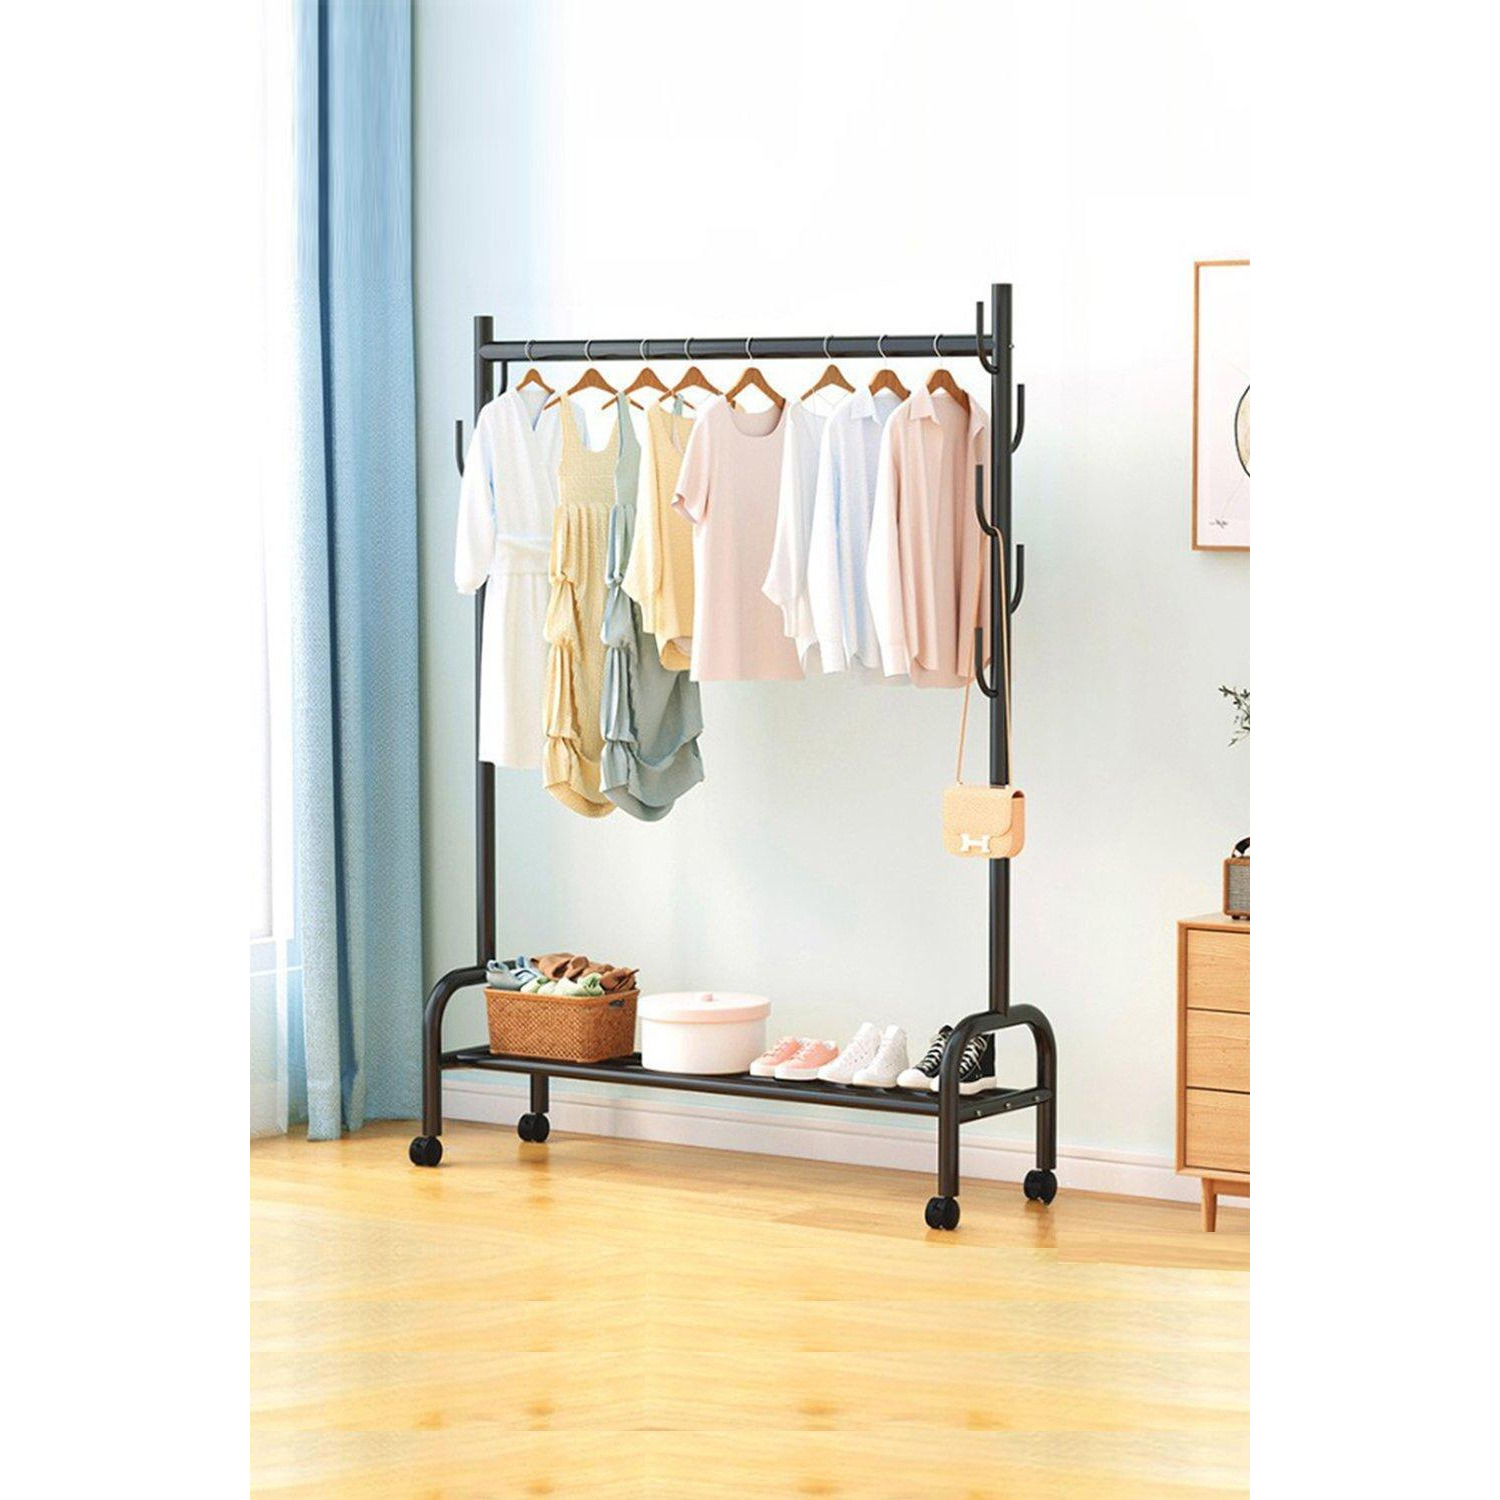 Indoor Garment Clothes Rack with Shoes Shelf on Wheels - image 1